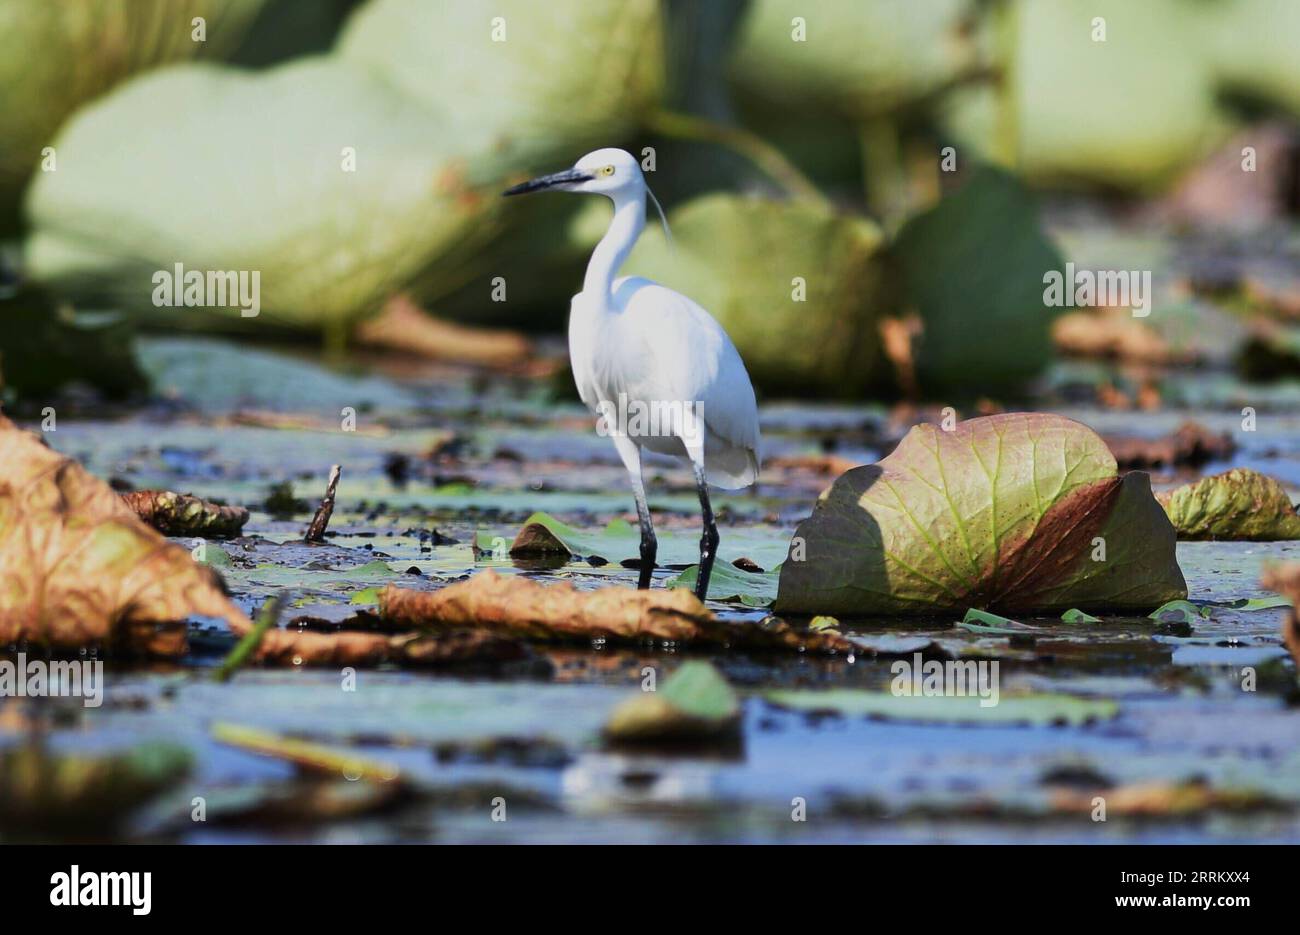 220922 -- XIONG AN, Sept. 22, 2022 -- Photo taken on Sept. 21, 2022 shows an egret in Baiyangdian Lake in Xiong an New Area, north China s Hebei Province. In recent years, the Xiong an New Area has strengthened the ecological protection and restoration of Baiyangdian Lake. Through systematic ecological management, the water quality of Baiyangdian Lake has seen a leaping improvement and the biodiversity has increased significantly. There are 237 species of birds in the lake area, 31 more than the amount before the establishment of the new area. The Xiong an New Area has designated nine bird hab Stock Photo